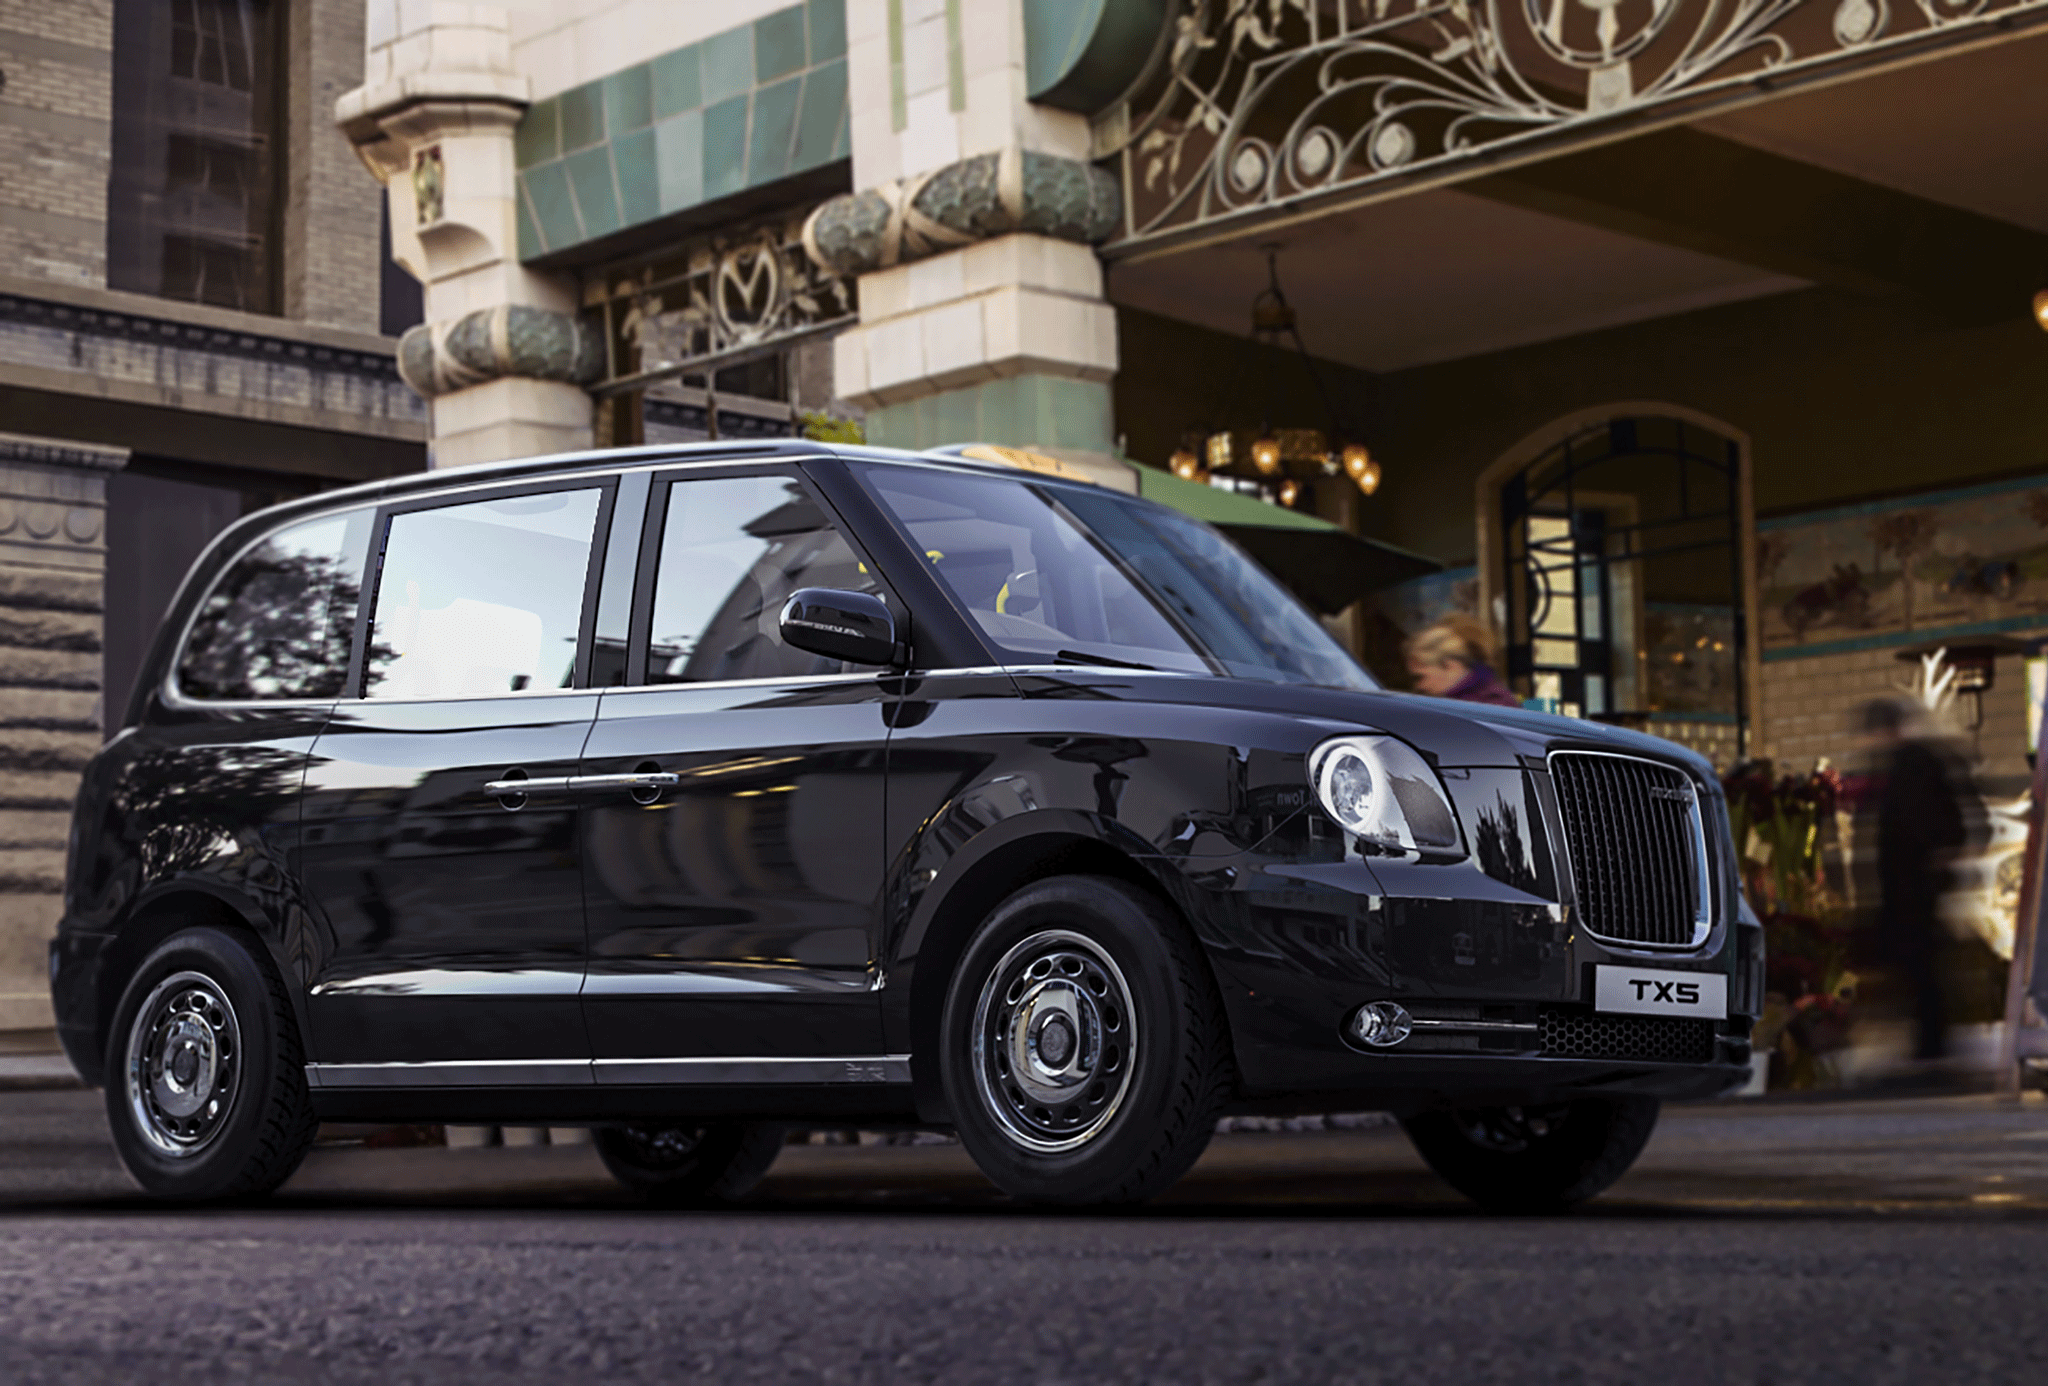 In January, Geely announced major expansion plans, meaning that the London black cab could soon be serving passengers in other European cities such as Oslo, Amsterdam, Paris and Berlin